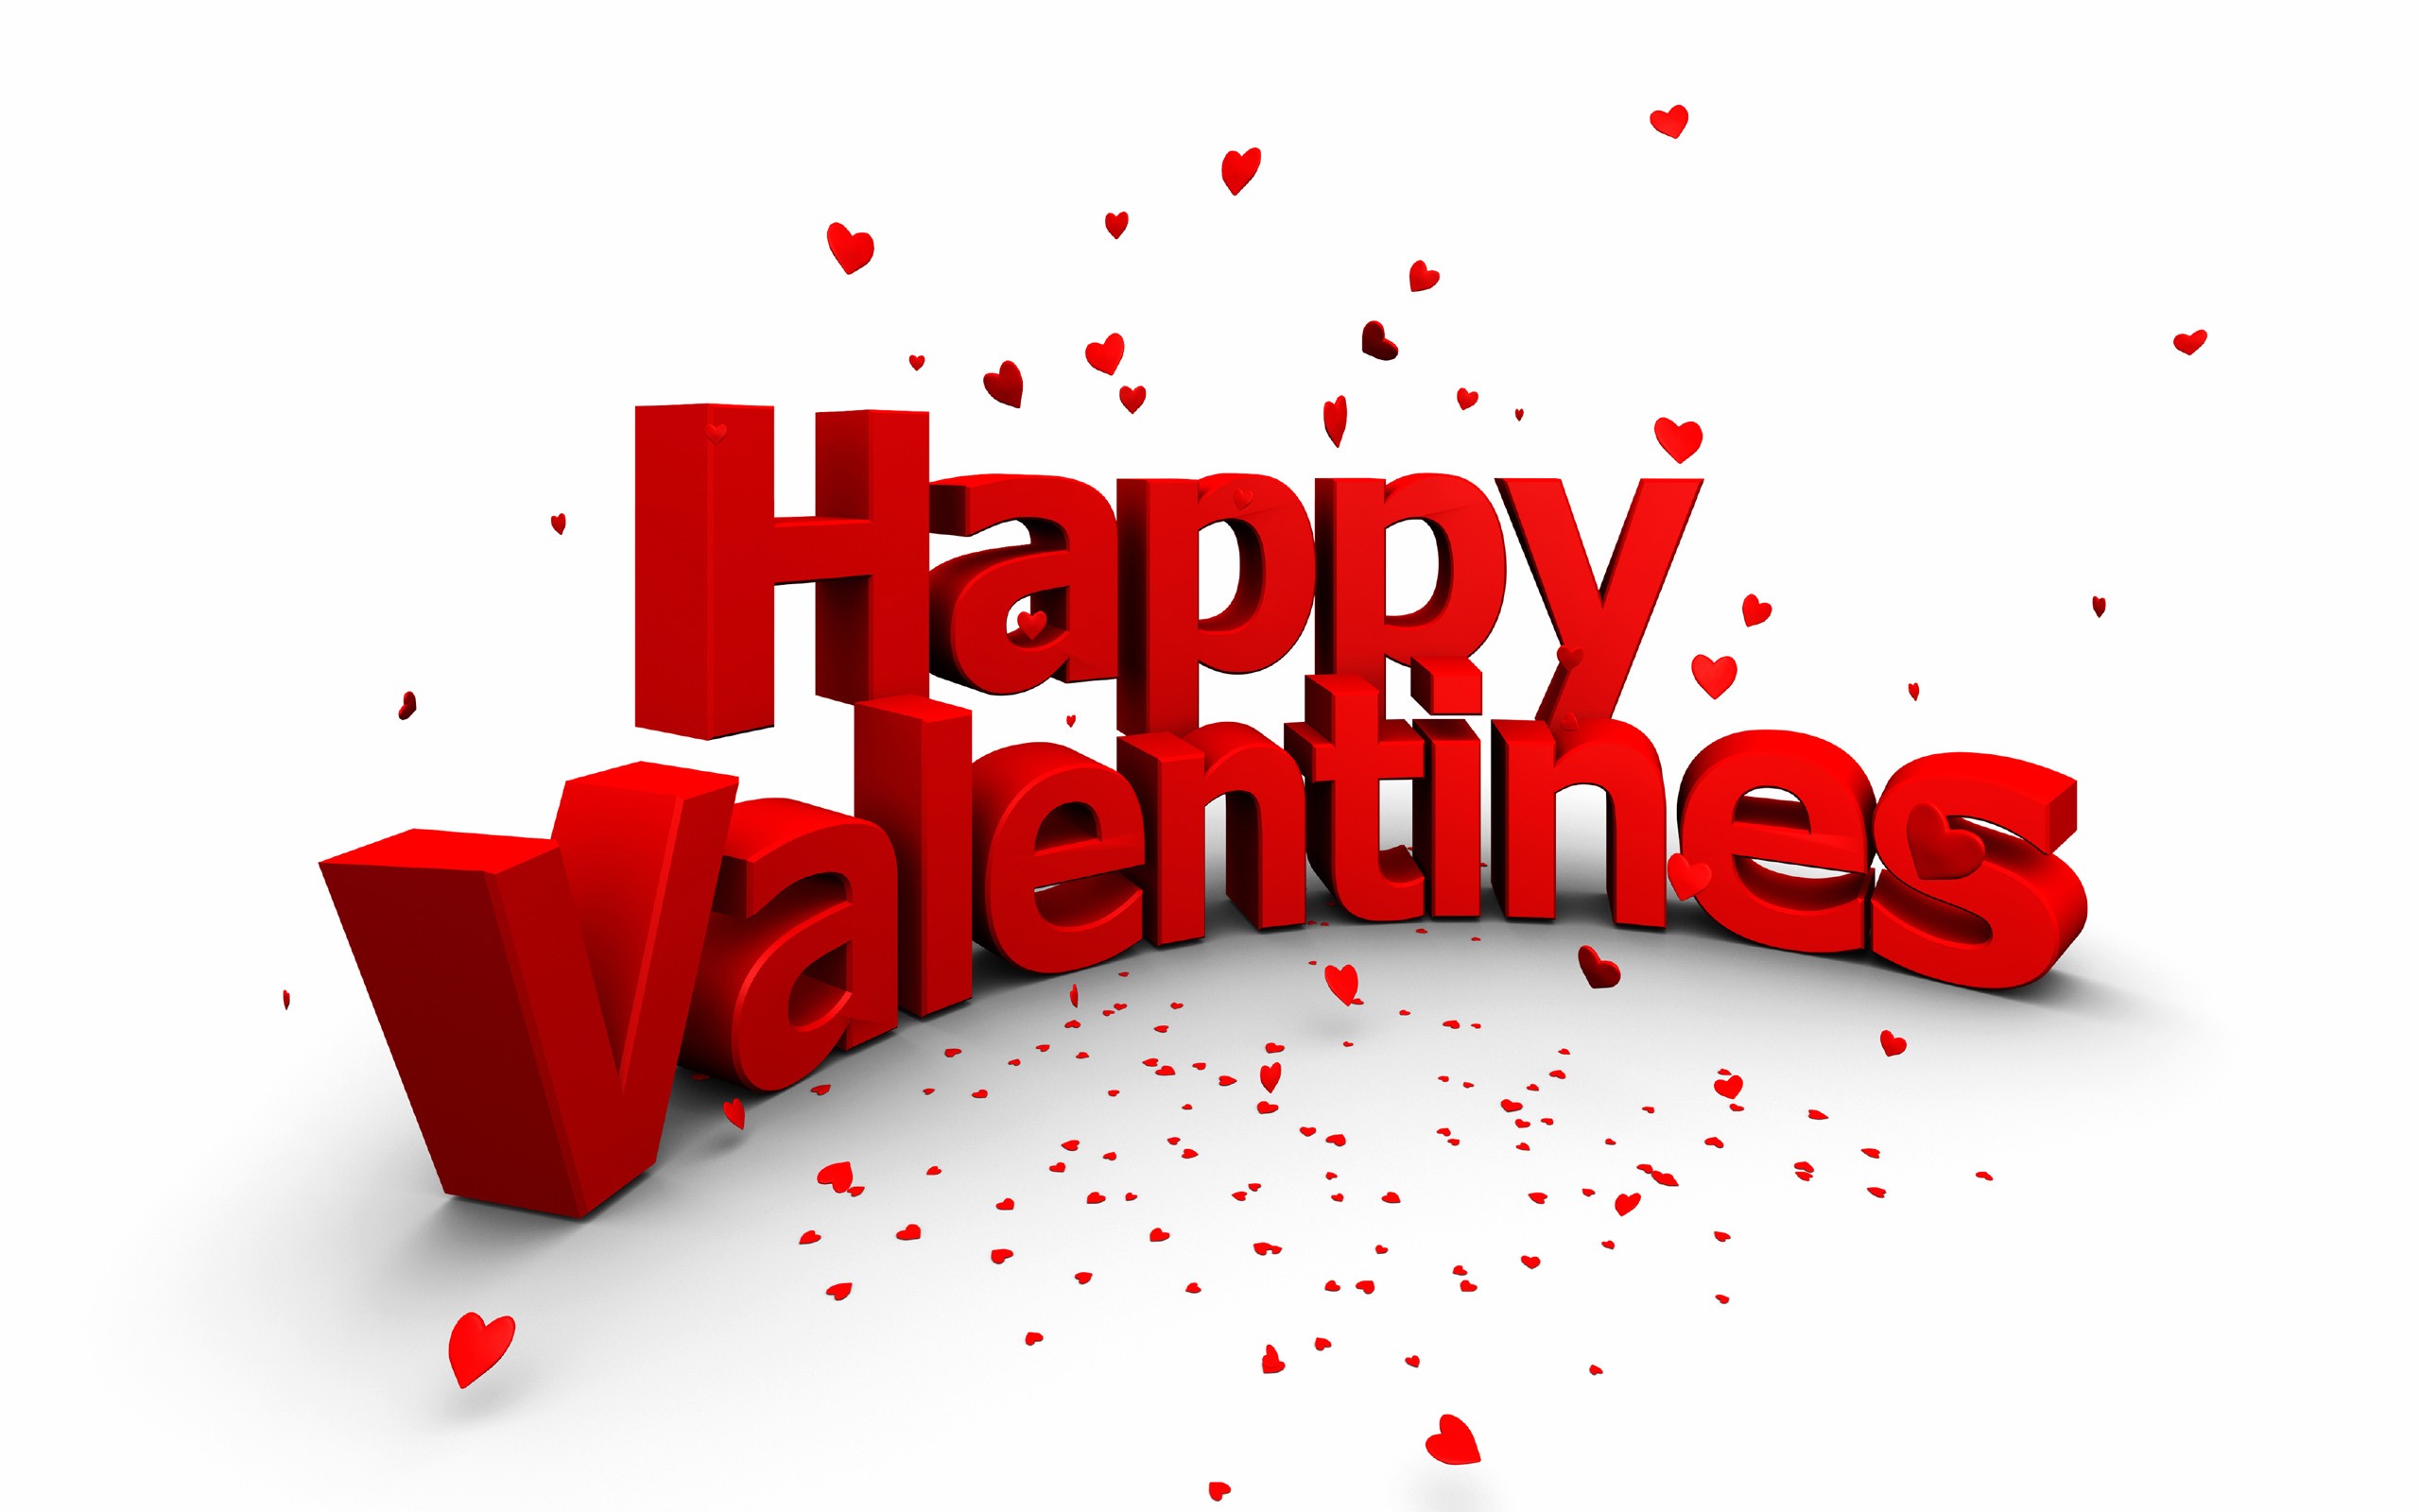 CHILD WELFARE DURBAN & DISTRICT INVITES YOU TO SHARE THE LOVE THIS VALENTINE’S DAY